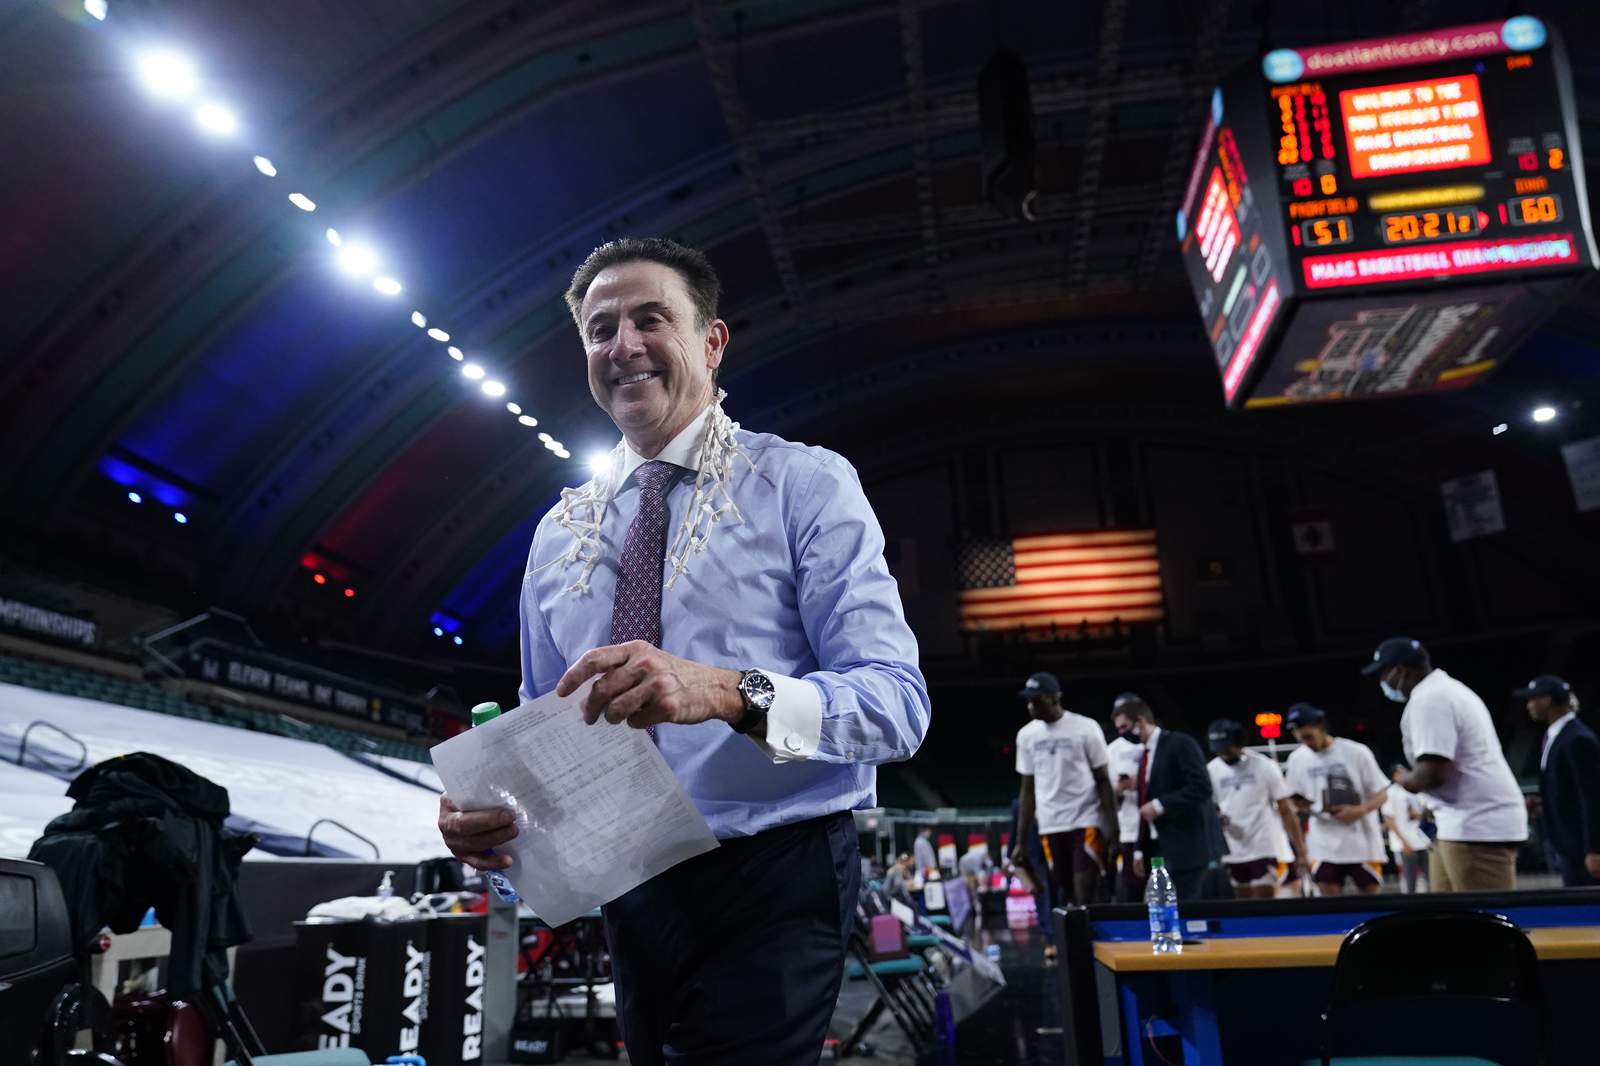 Pitino back in the NCAA Tournament with MAAC champs Iona